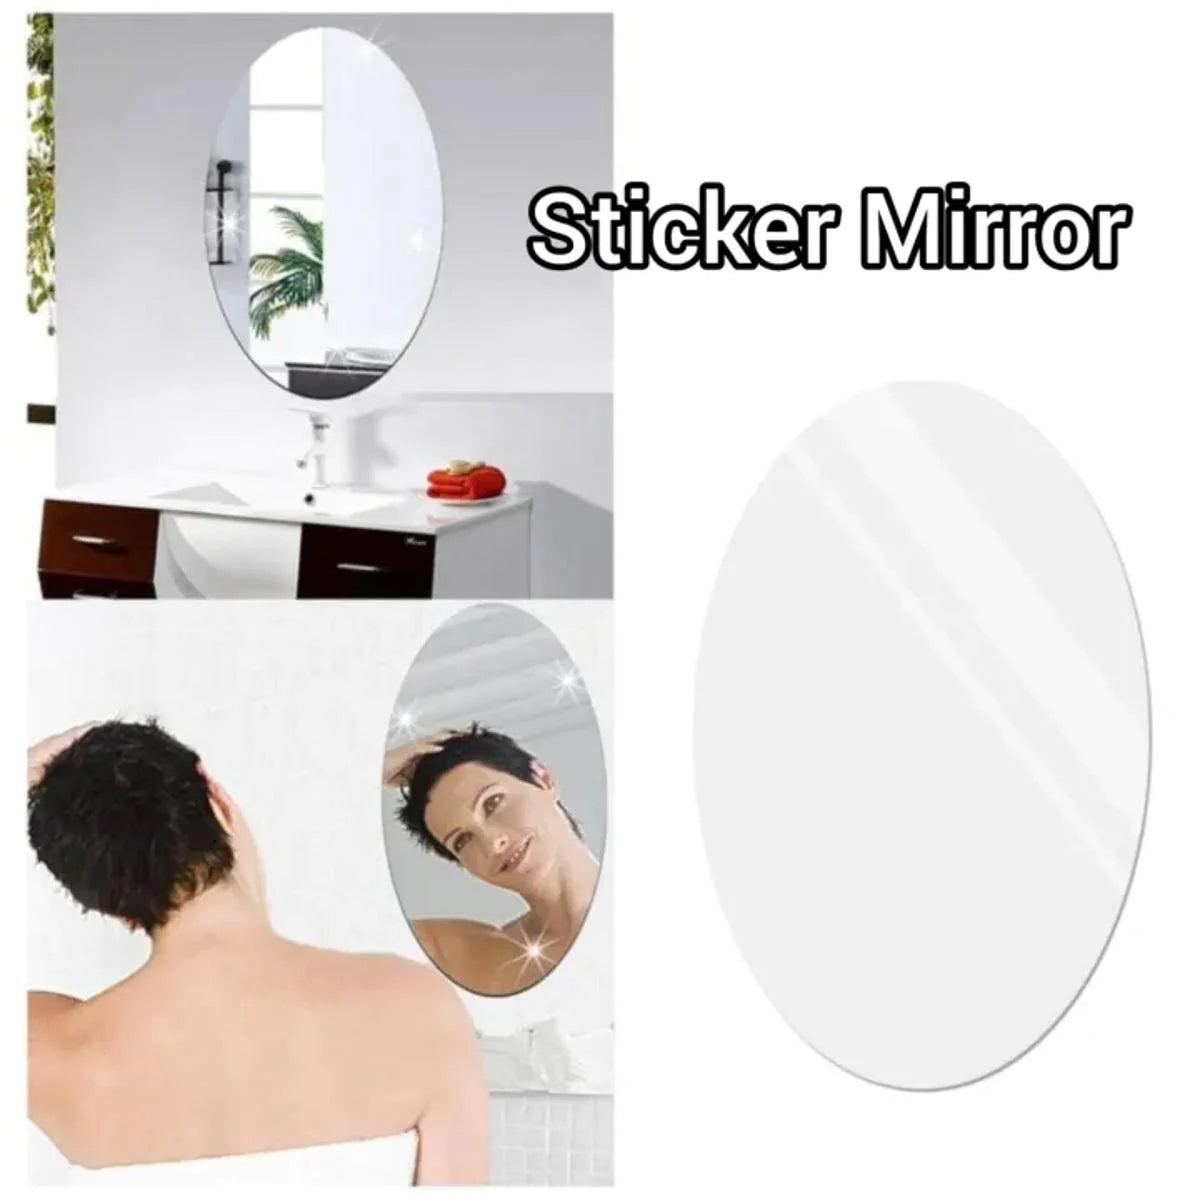 (2pcs) Sticky Self-Adhesive Oval Shape Small-Size Mirror Sticker Paper ( 12-inches X 8-inches Size )